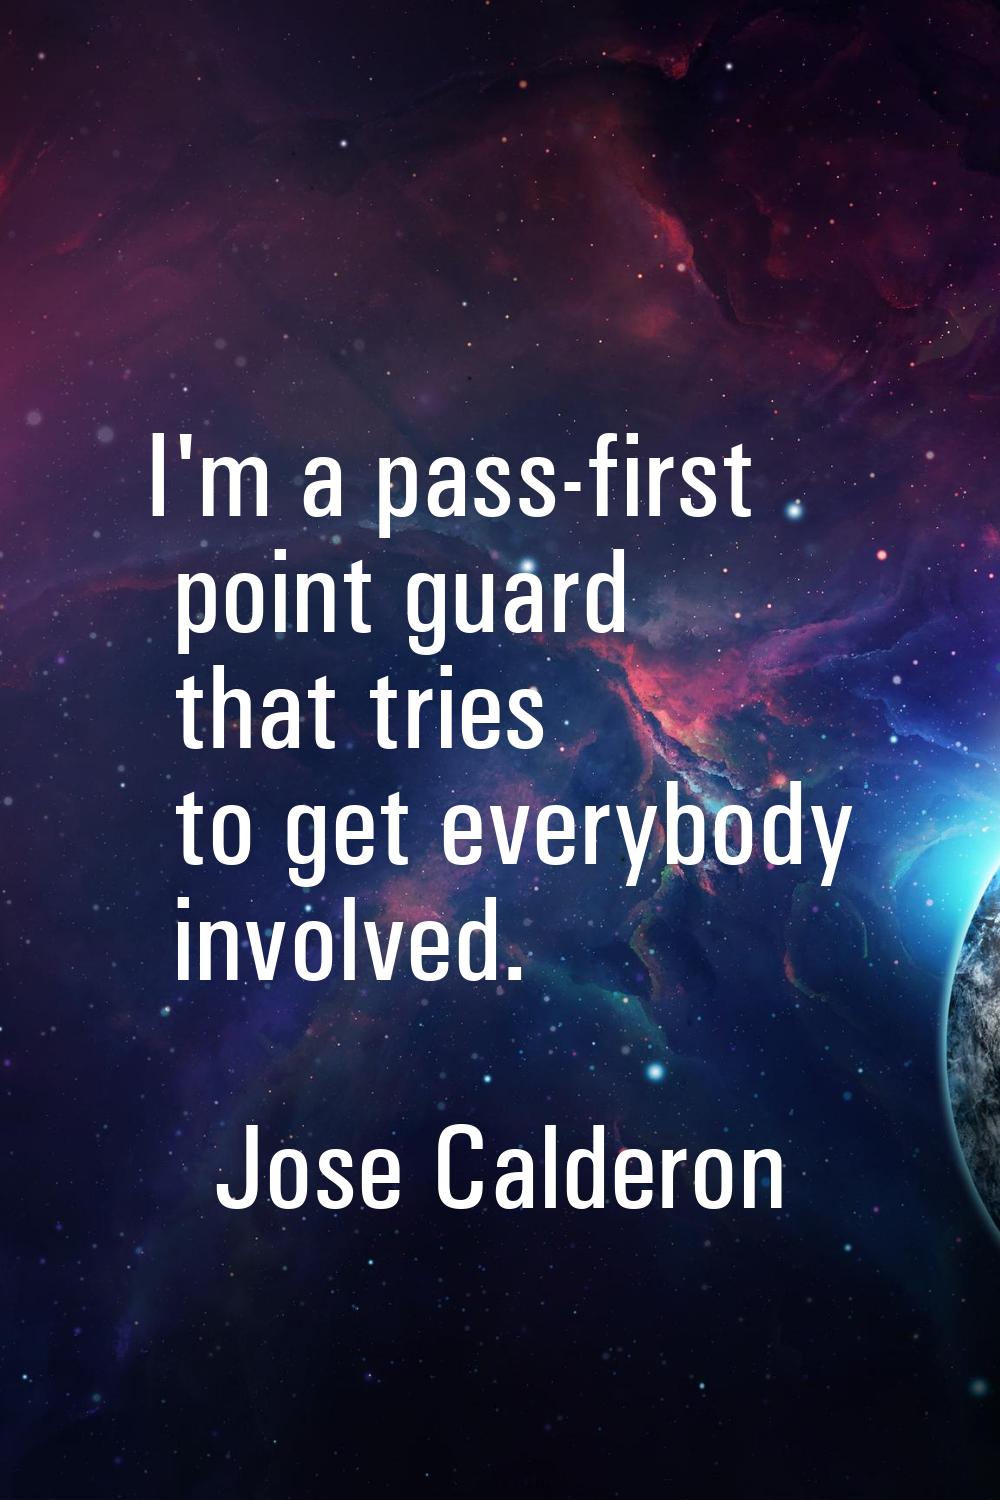 I'm a pass-first point guard that tries to get everybody involved.